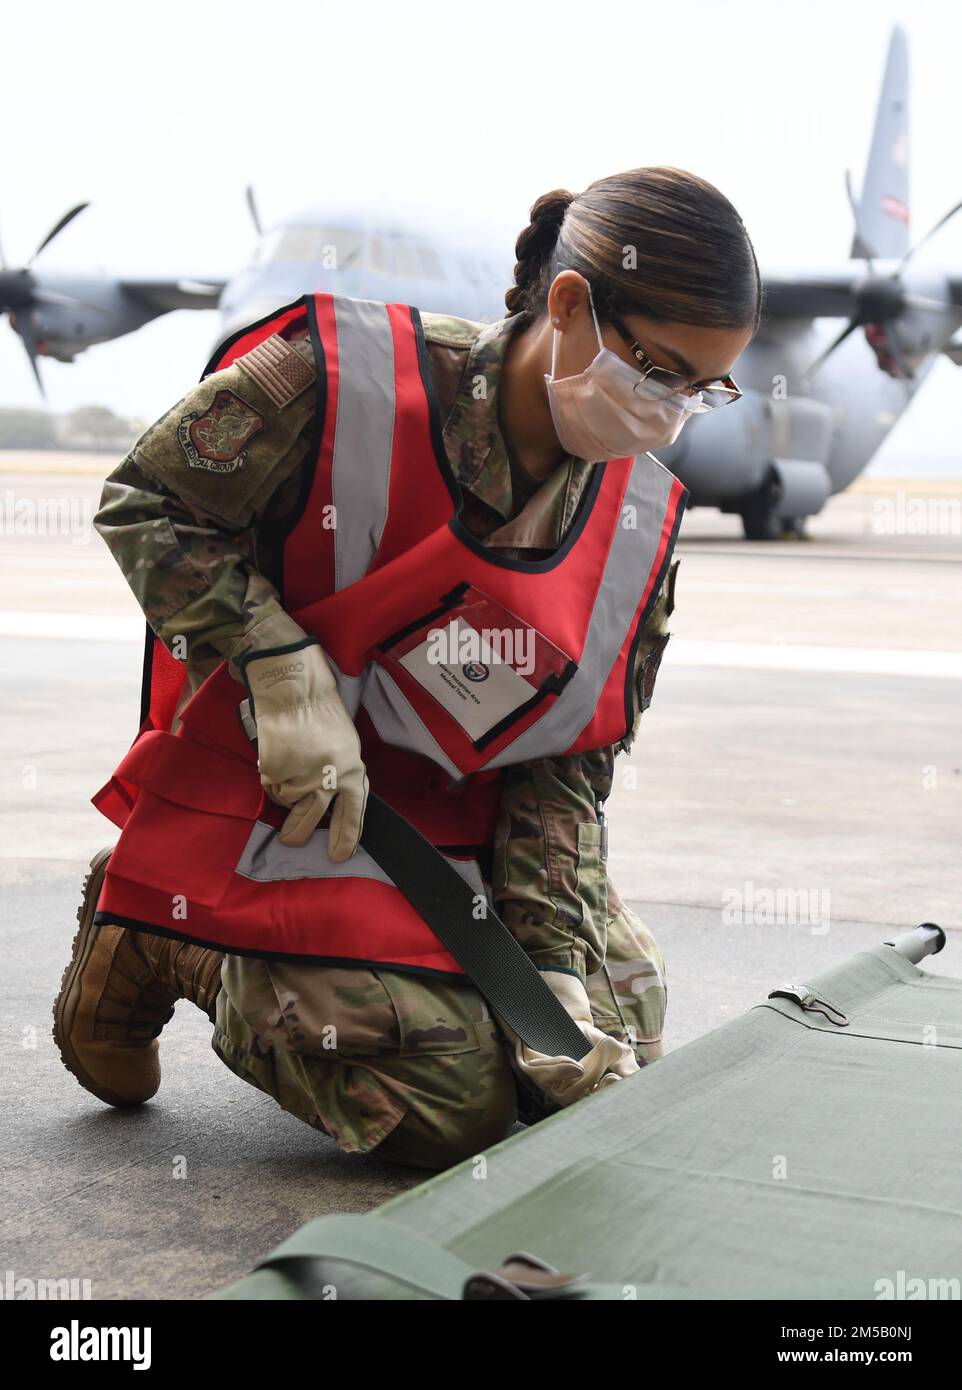 U.S Air Force Airman 1st Class Elizabeth Contreras, 81st Healthcare Operations Squadron medical technician, prepares a stretcher for patients during the National Disaster Medical System Exercise outside the 41st Aerial Port Squadron building at Keesler Air Force Base, Mississippi, Feb. 17, 2022. Keesler's Federal Coordination Center was activated and received more than 20 patients during the exercise scenario, which included the New Madrid Fault erupting, sparking an earthquake to occur in Tennessee causing extensive damage and injuring many people. Members of the 81st Medical Group participat Stock Photo